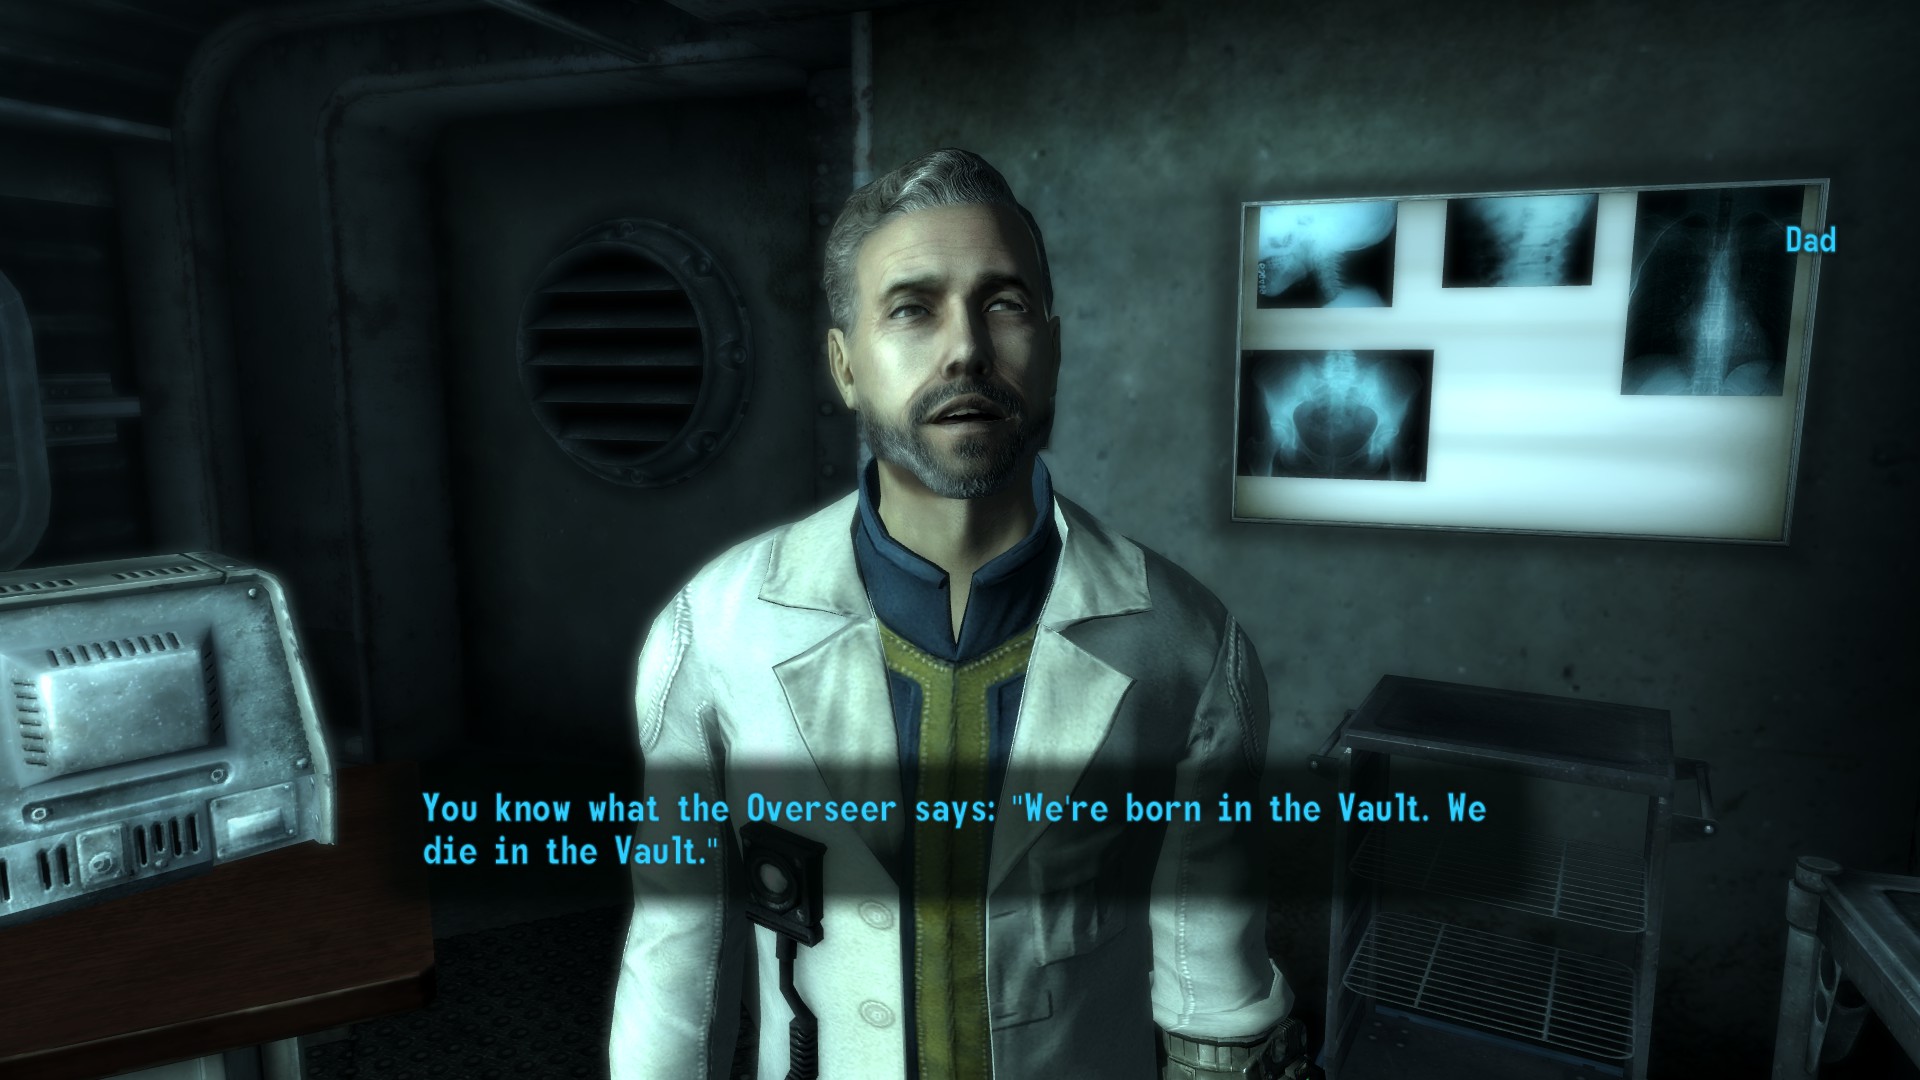 Dad from Fallout 3, he escapes the vault to create clean water supply, but his 

escape results in creatures swarming Vault 101. Also, he leaves the player, knowing 

the Overseer will be angry.